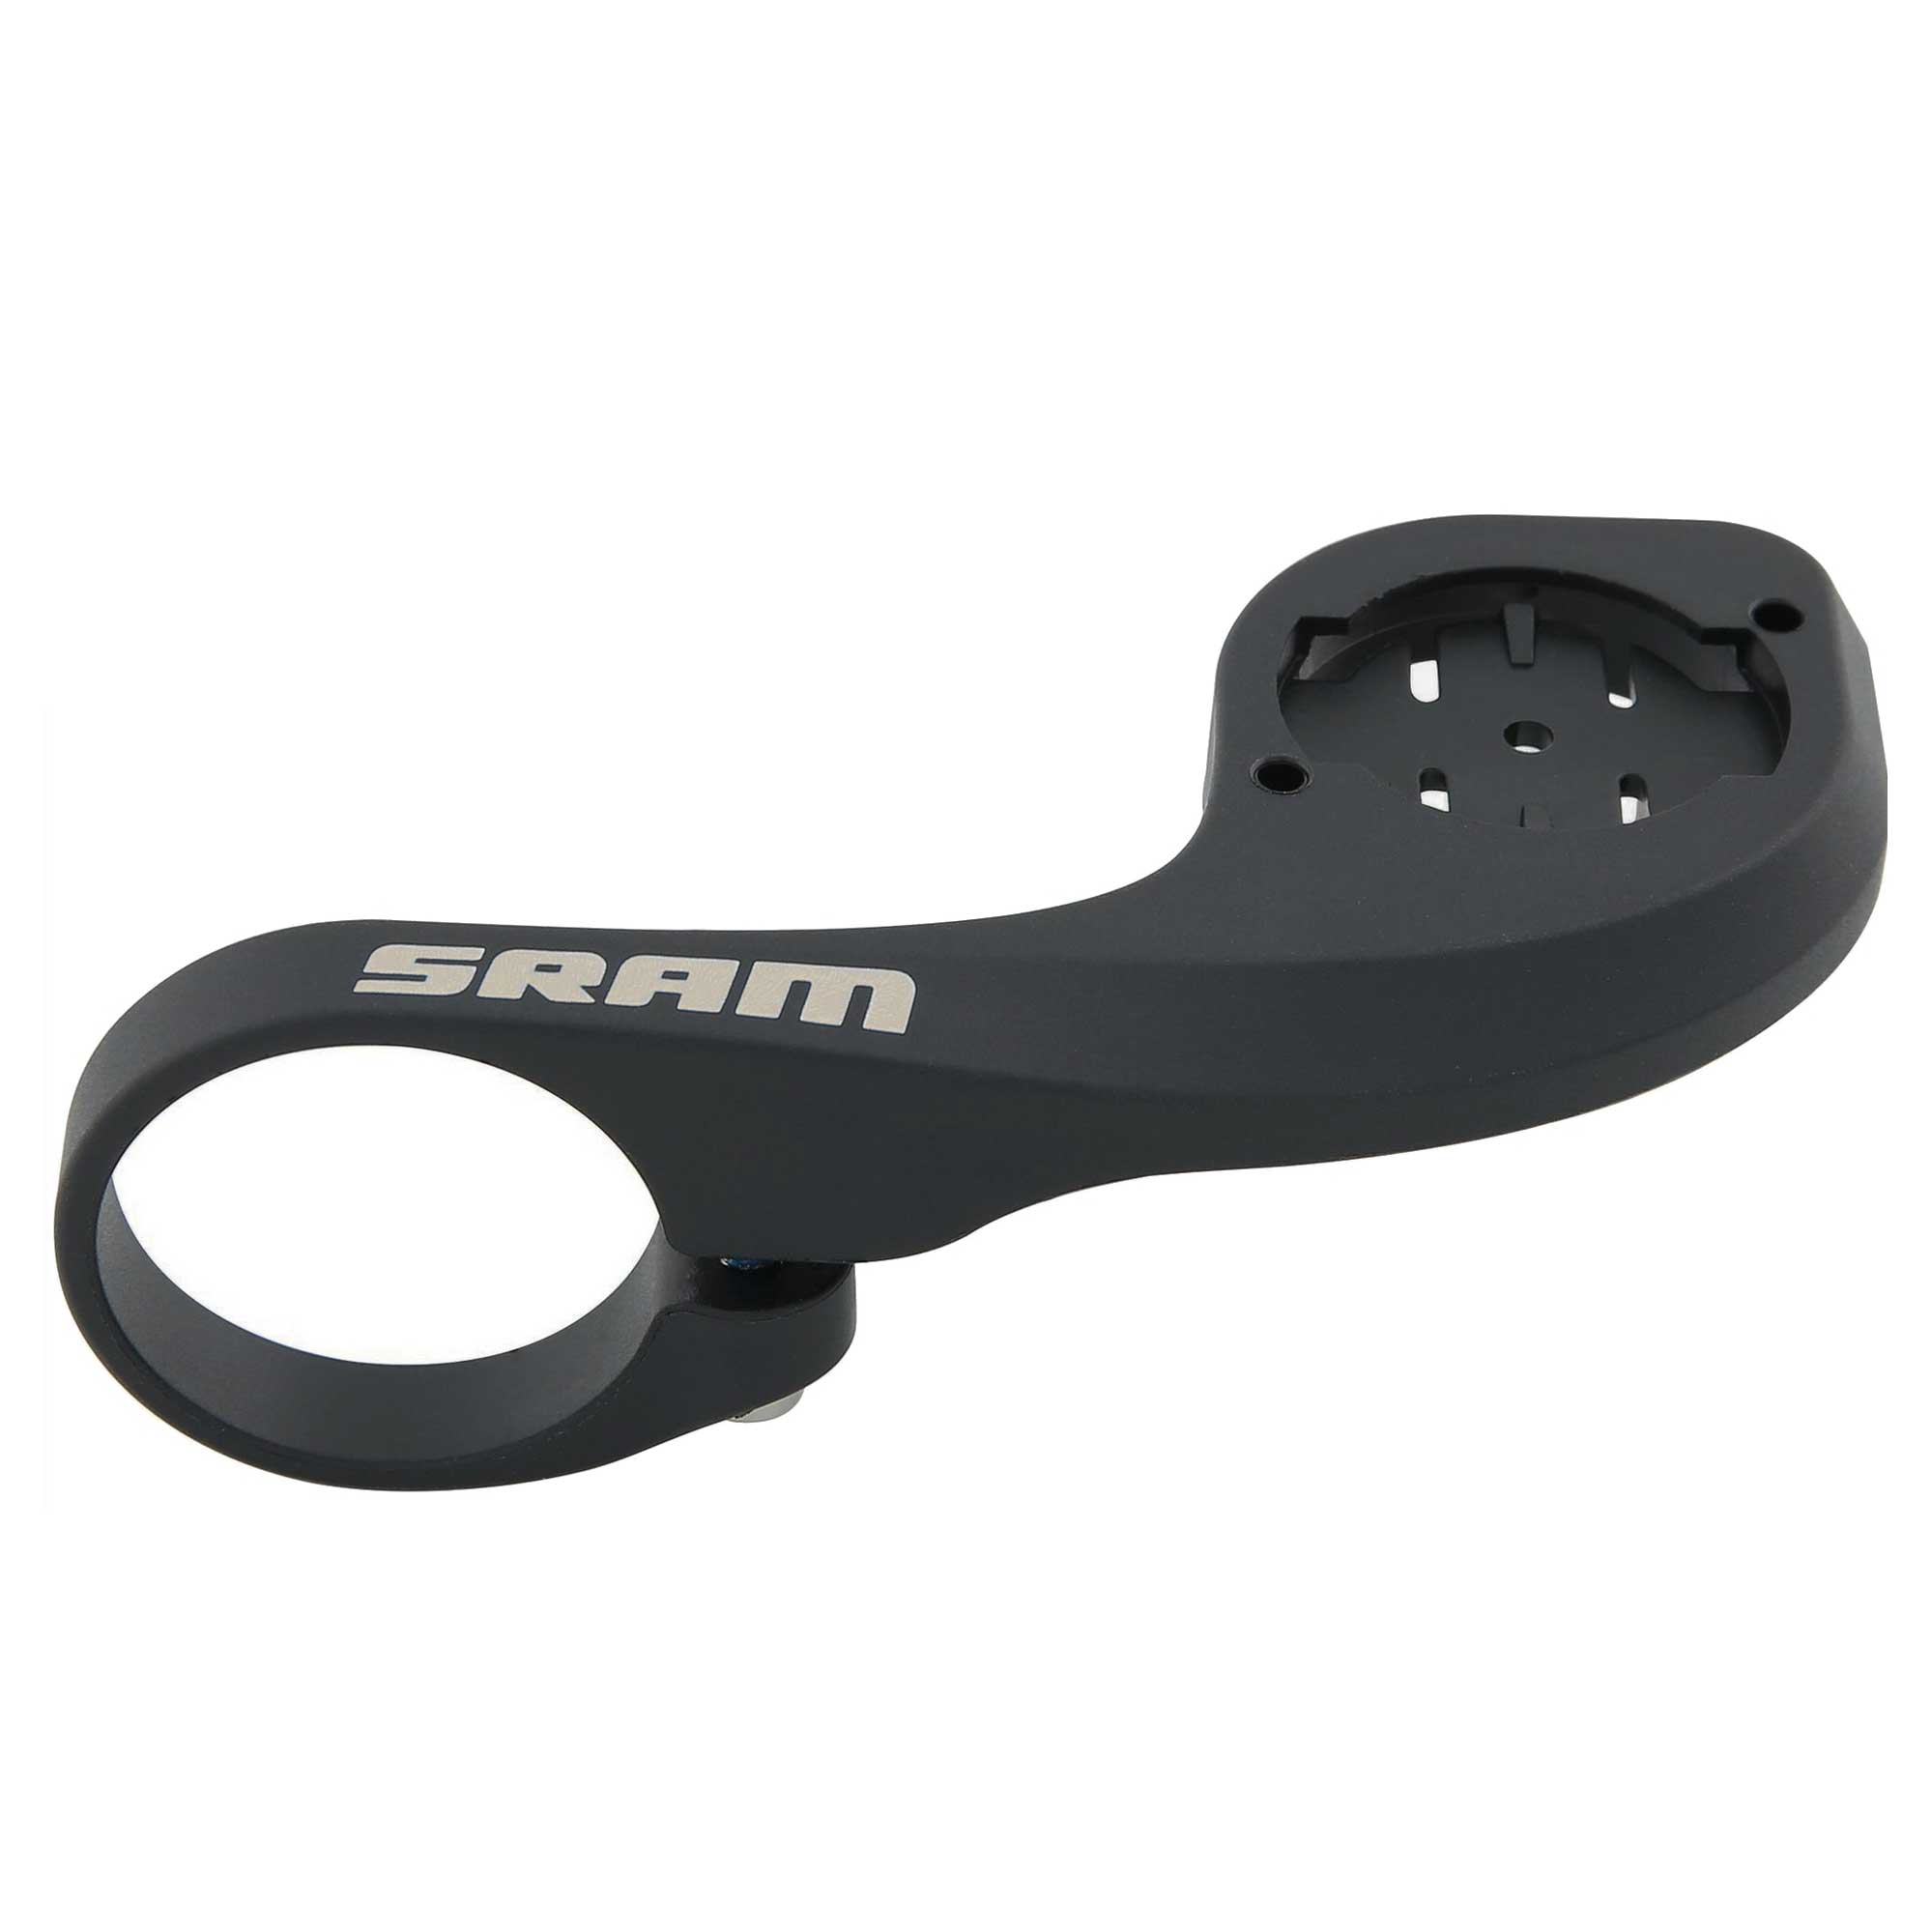 Image of SRAM Road QuickView Computer Mount for Garmin Edge